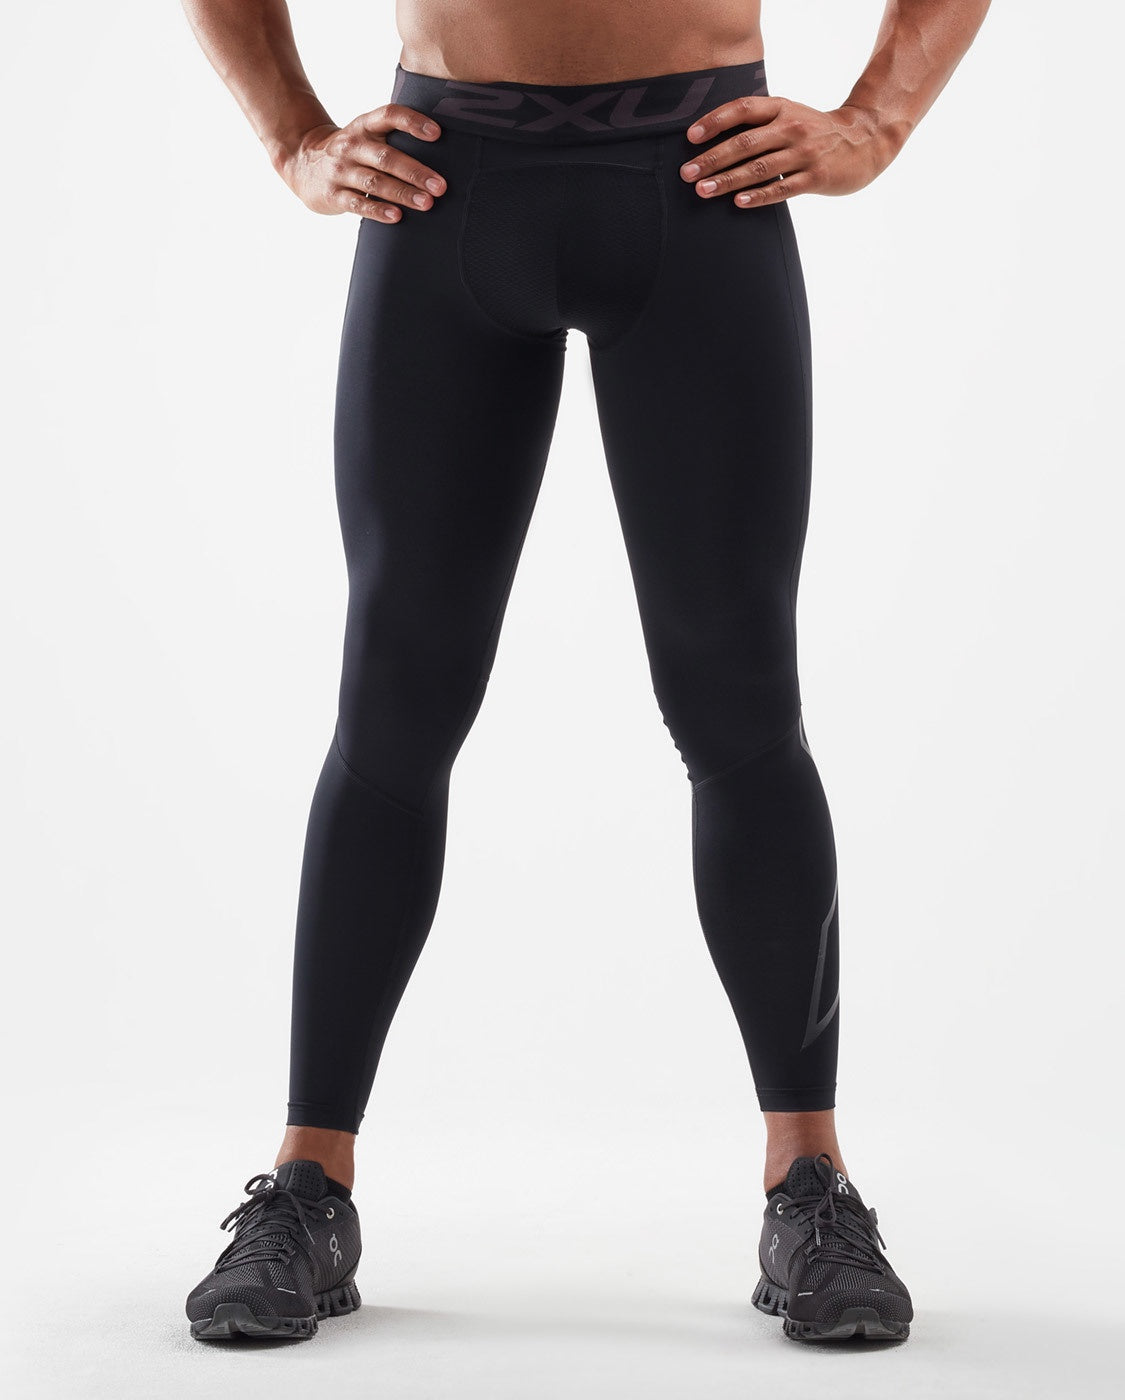 2XU ACCELERATE COMPRESSION TIGHTS WITH STORAGE